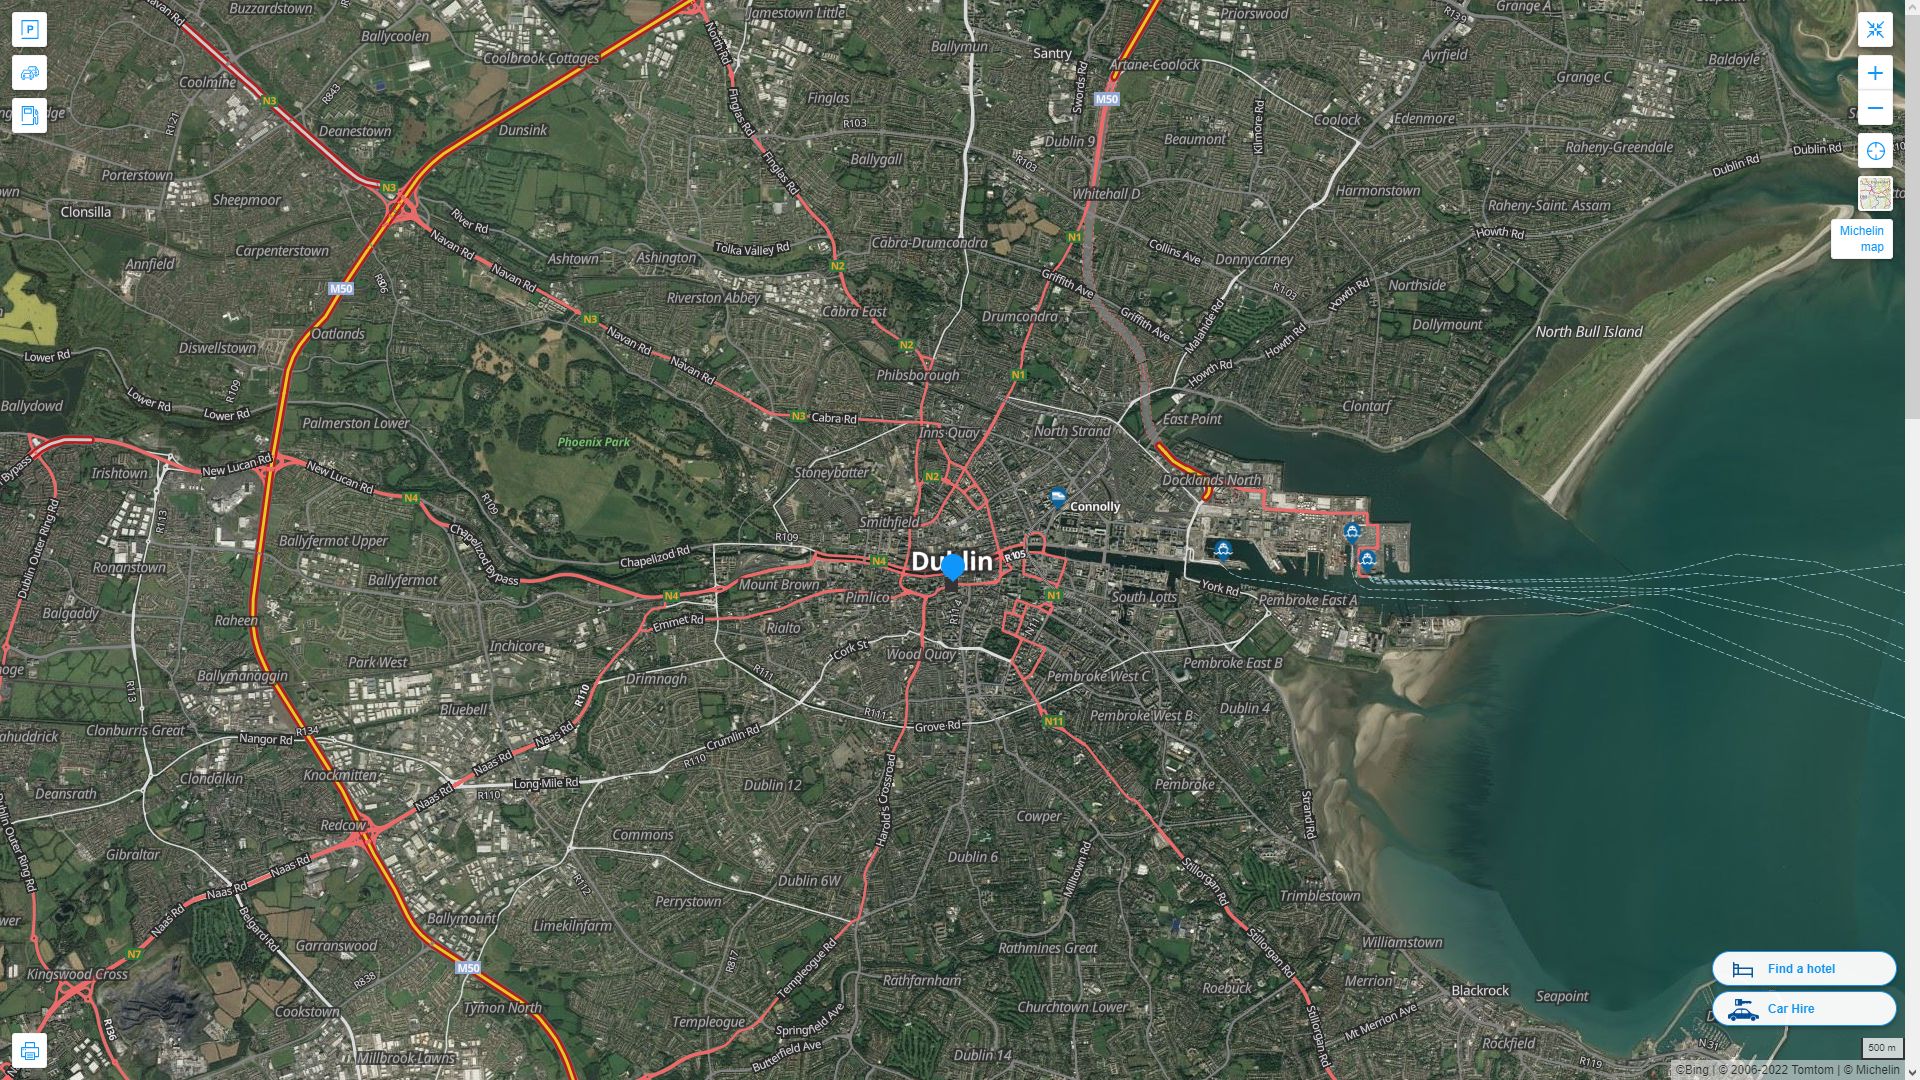 Dublin Highway and Road Map with Satellite View